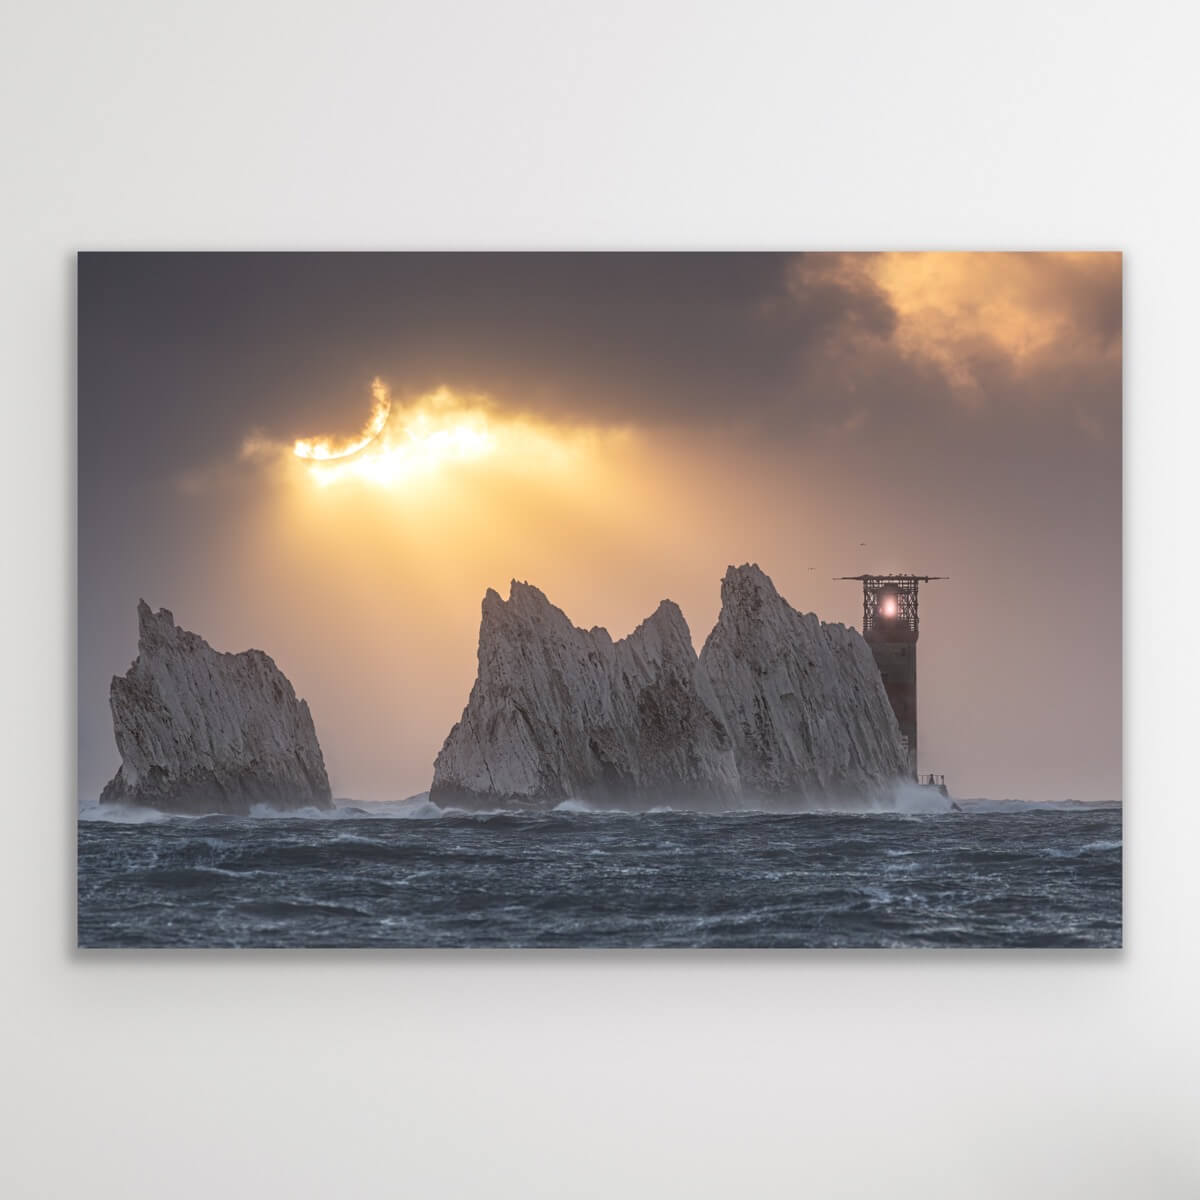 The Needles Sunset Photograph Gallery Isle of Wight Landscape Prints